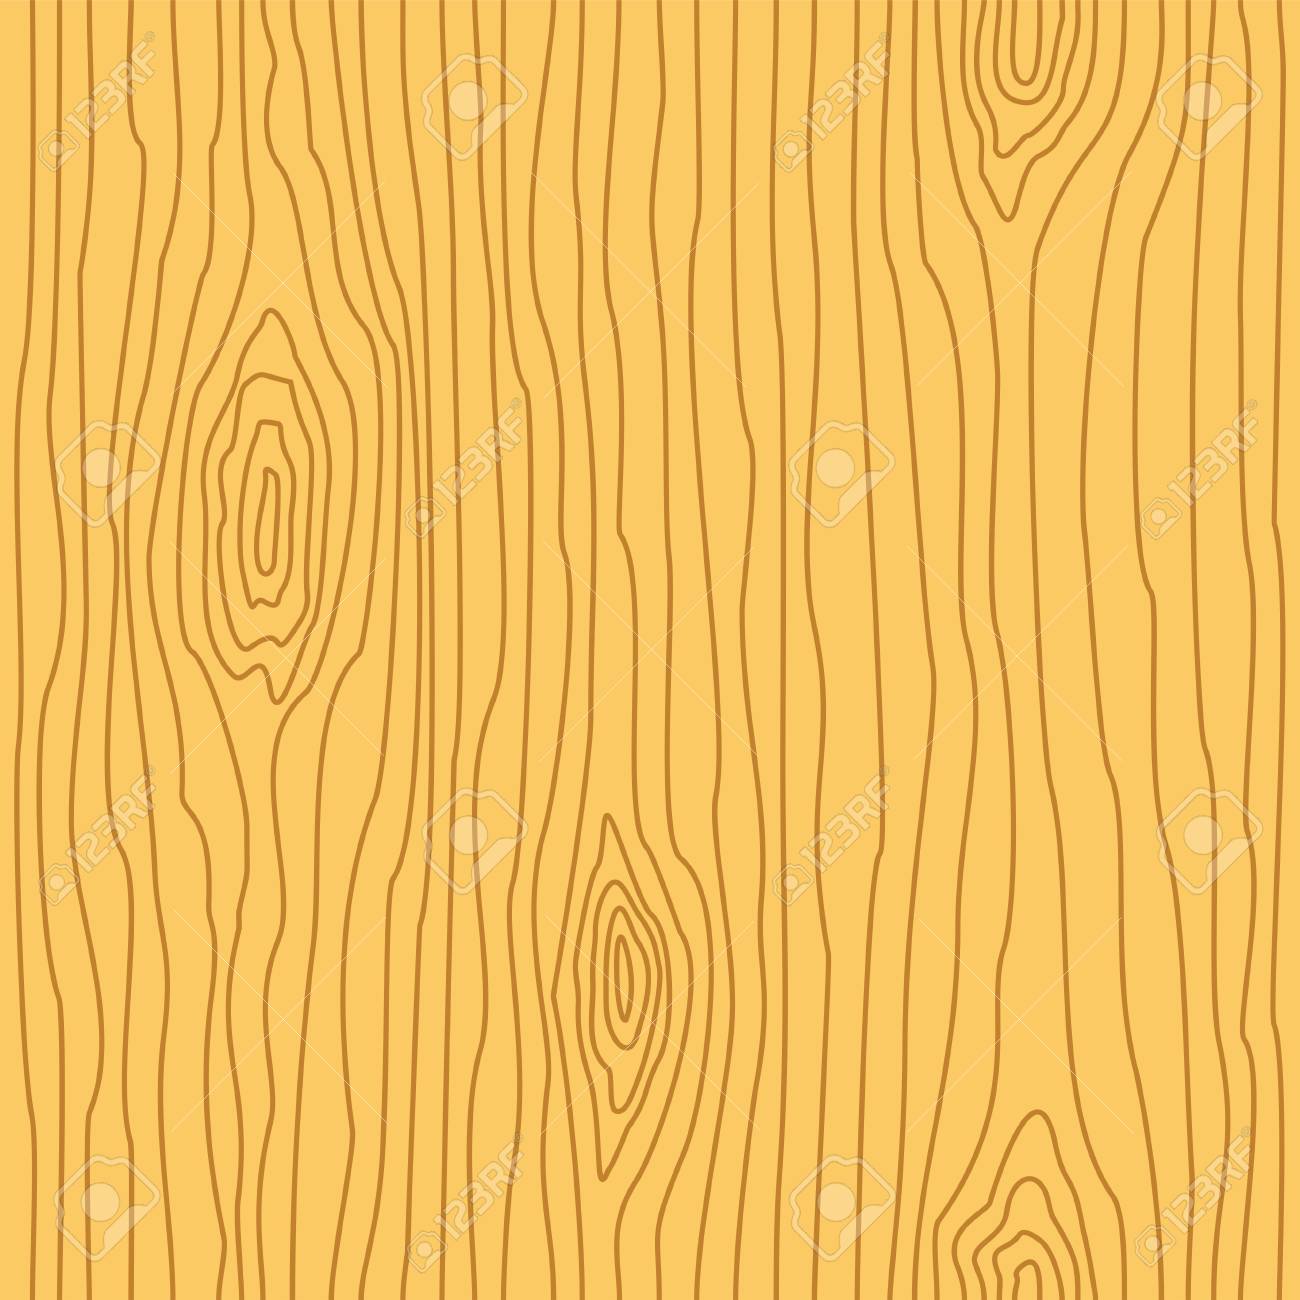 Wood Texture Vector Illustrator at Vectorified.com | Collection of Wood